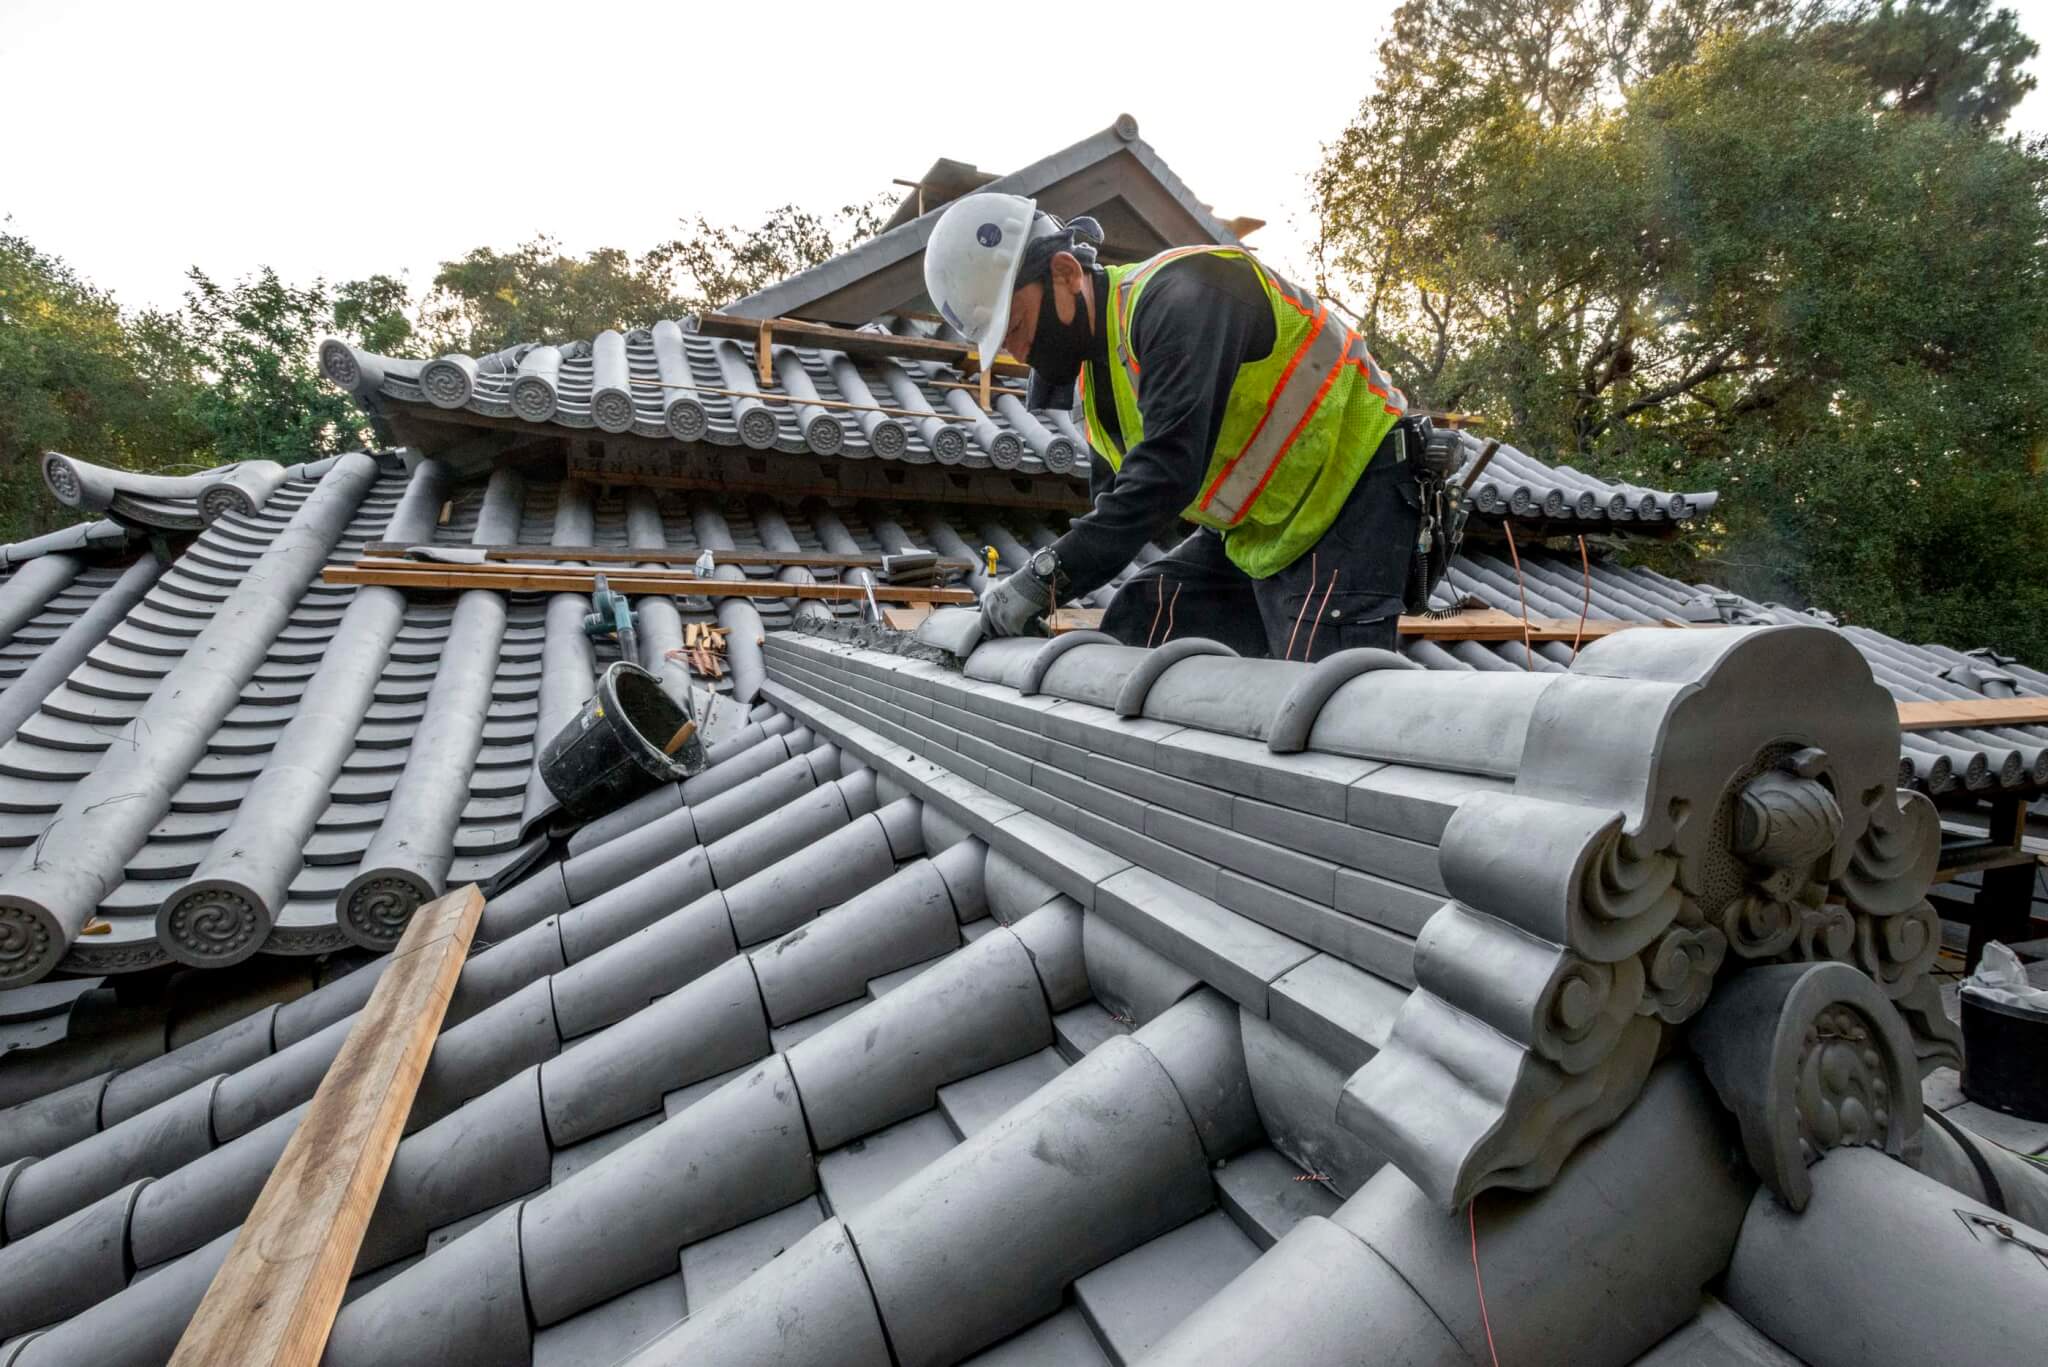 working on roof tiles at huntington library